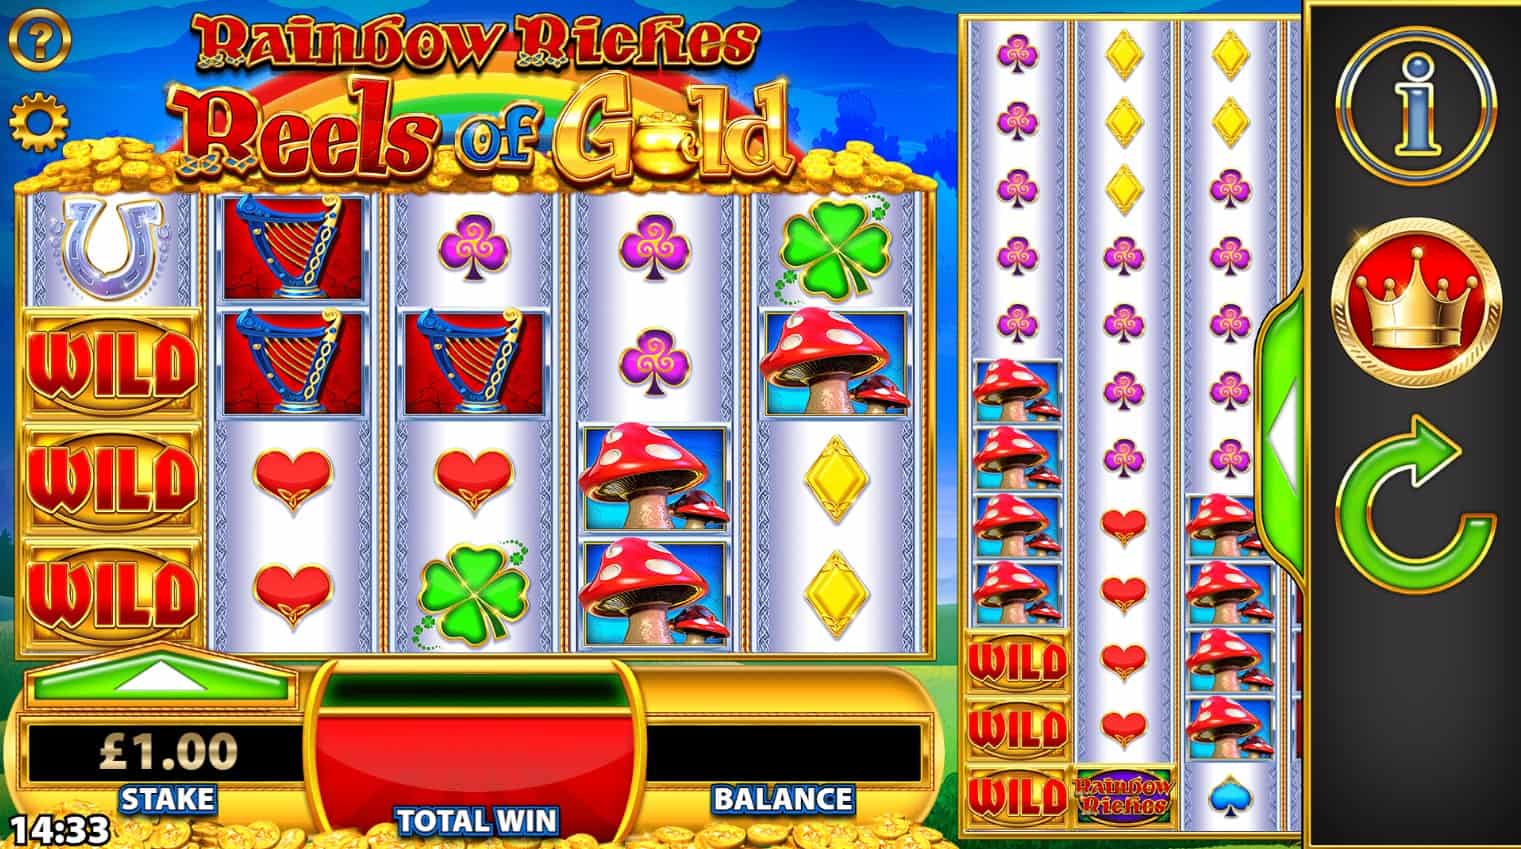 Rainbow Riches Reels of Gold by SG Interactive Barcrest E-Vegas.com Reviews